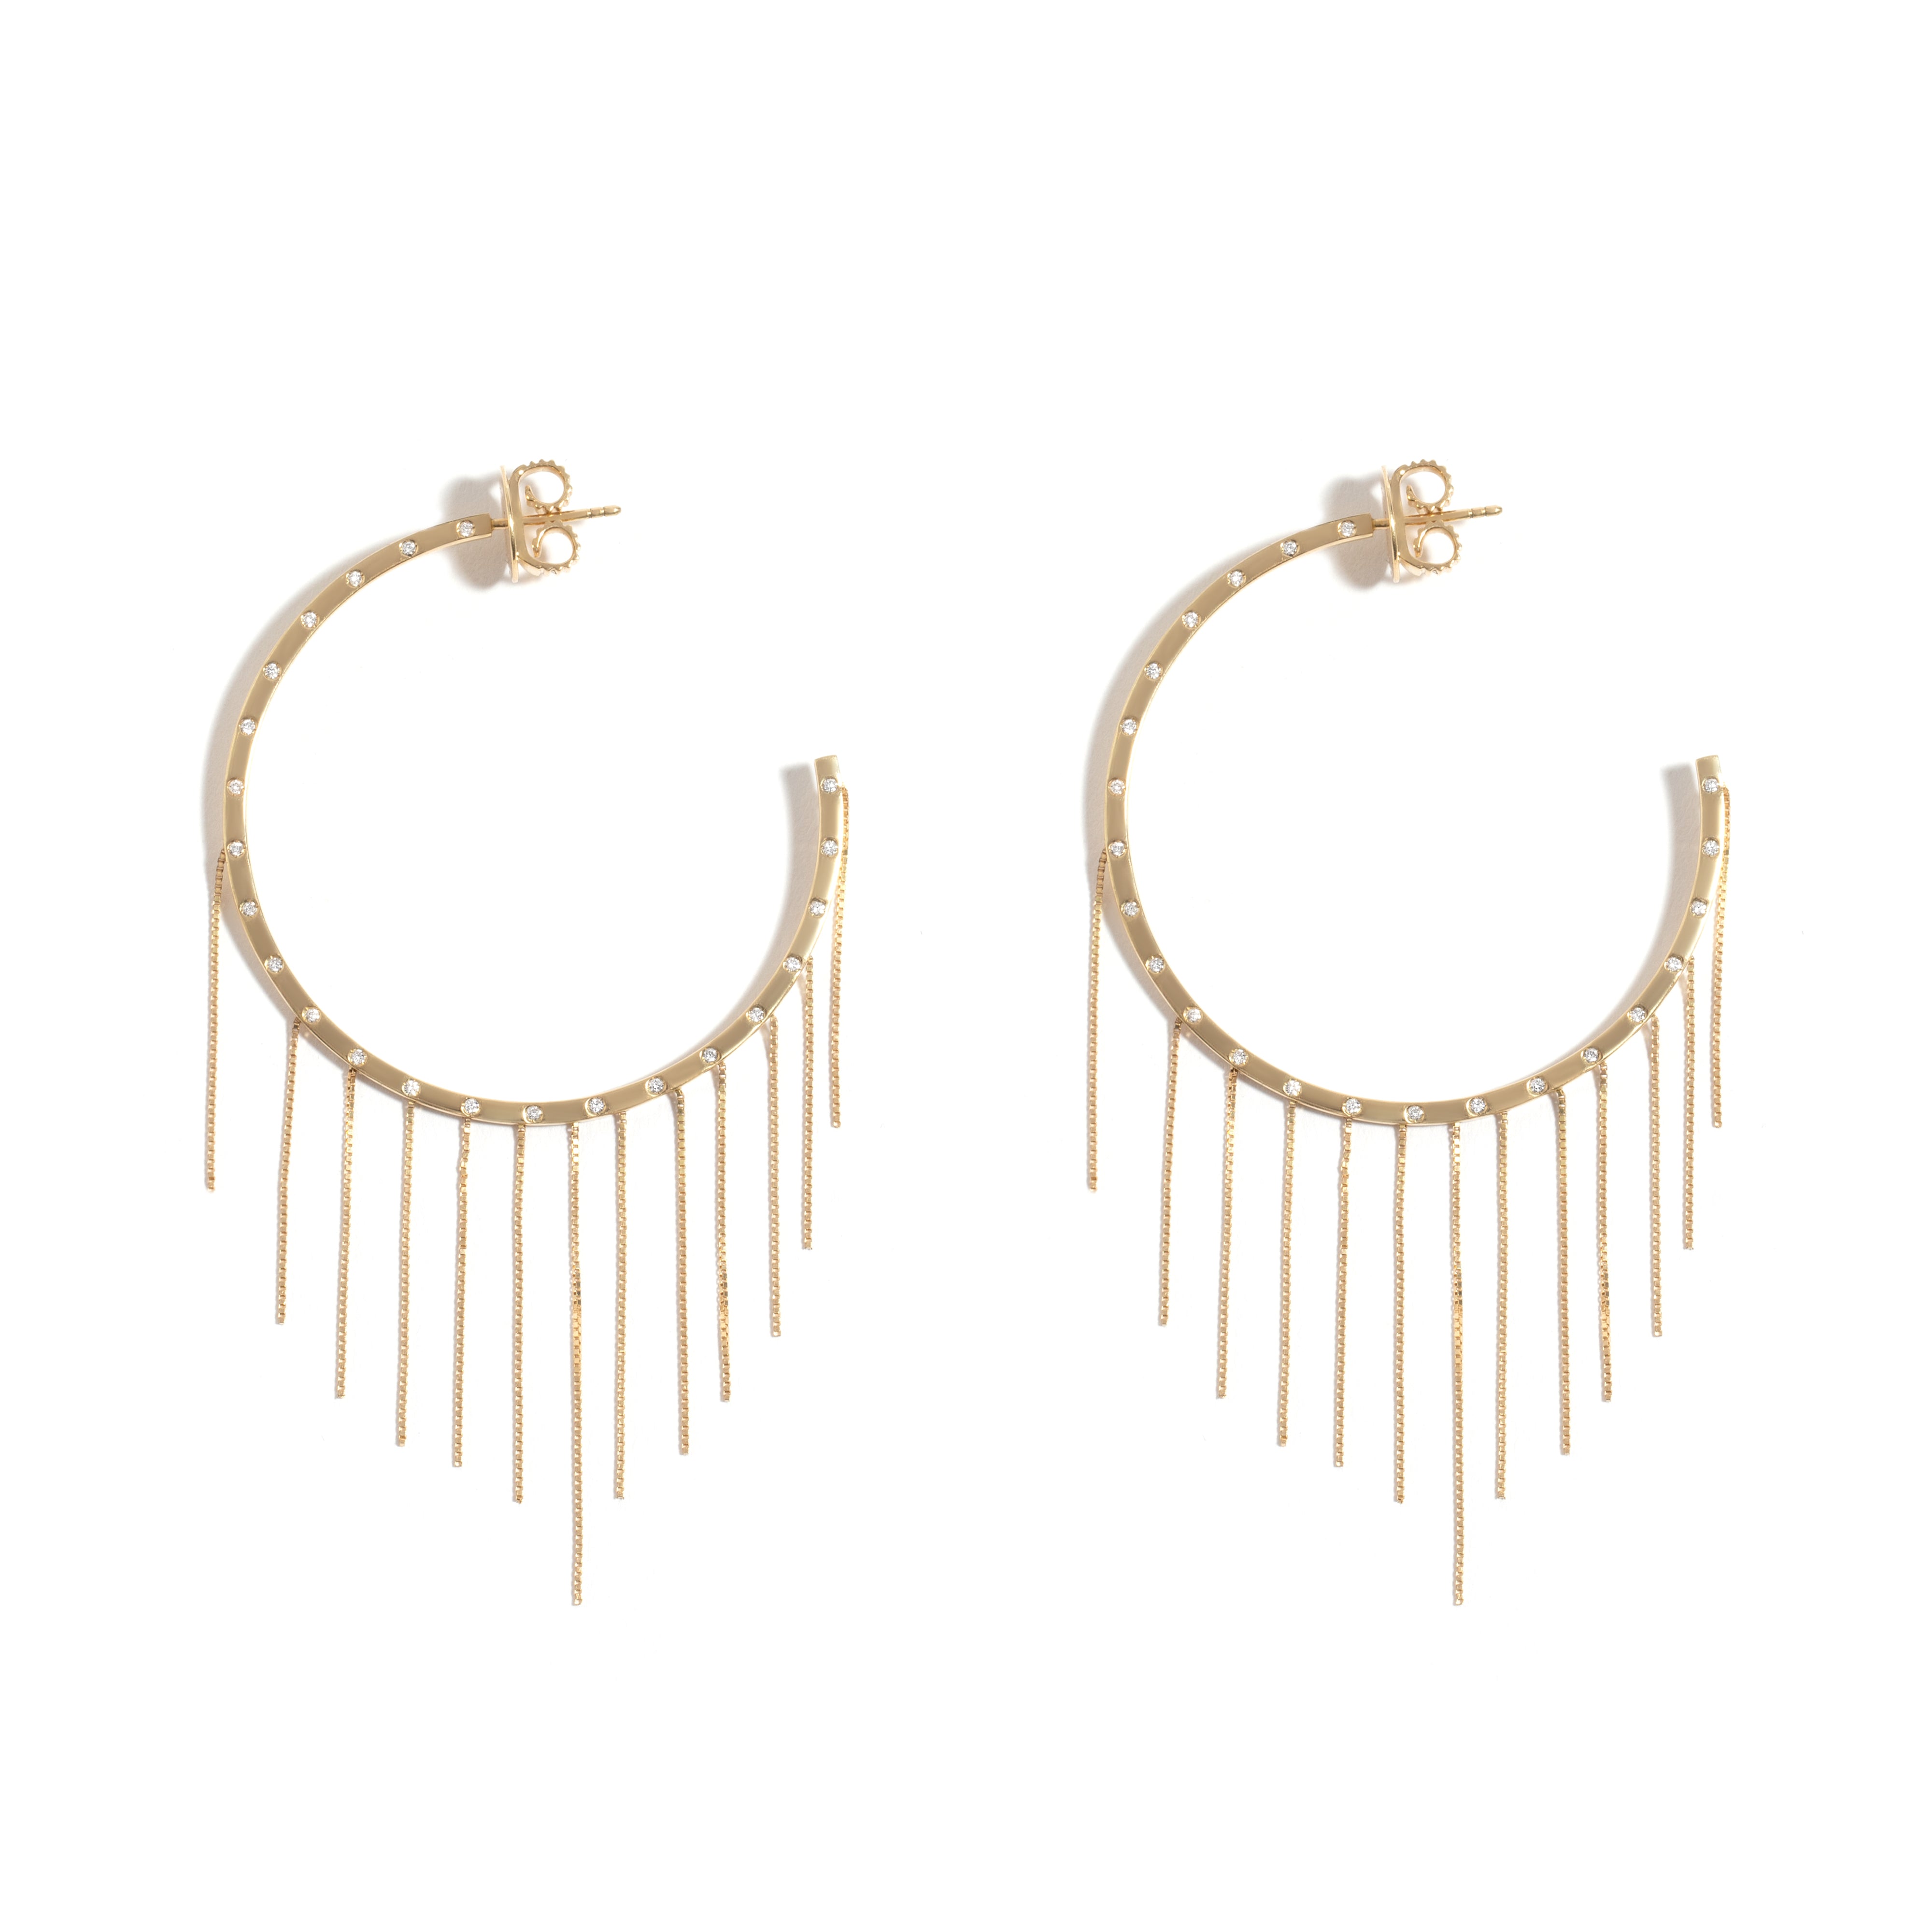 NEW VINTAGE FRINGE HOOP EARRING IN 18K YELLOW GOLD WITH DIAMOND